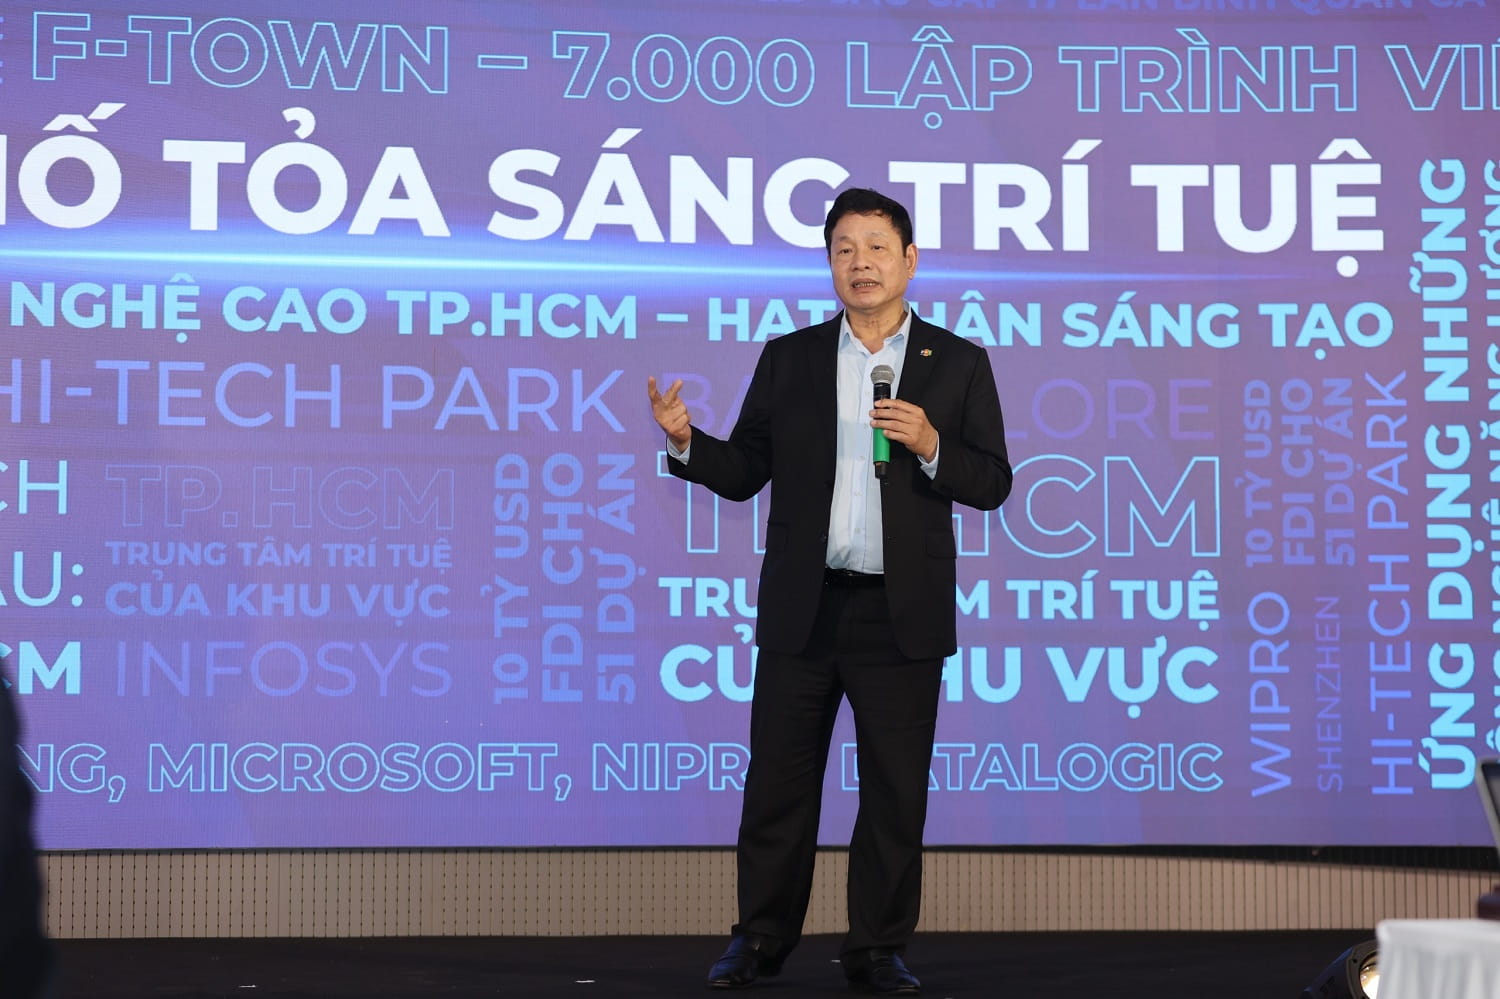 Mr. Truong Gia Binh - Chairman of FPT Corporation - shared his suggestions to make HCMC a city of intellectual brilliance